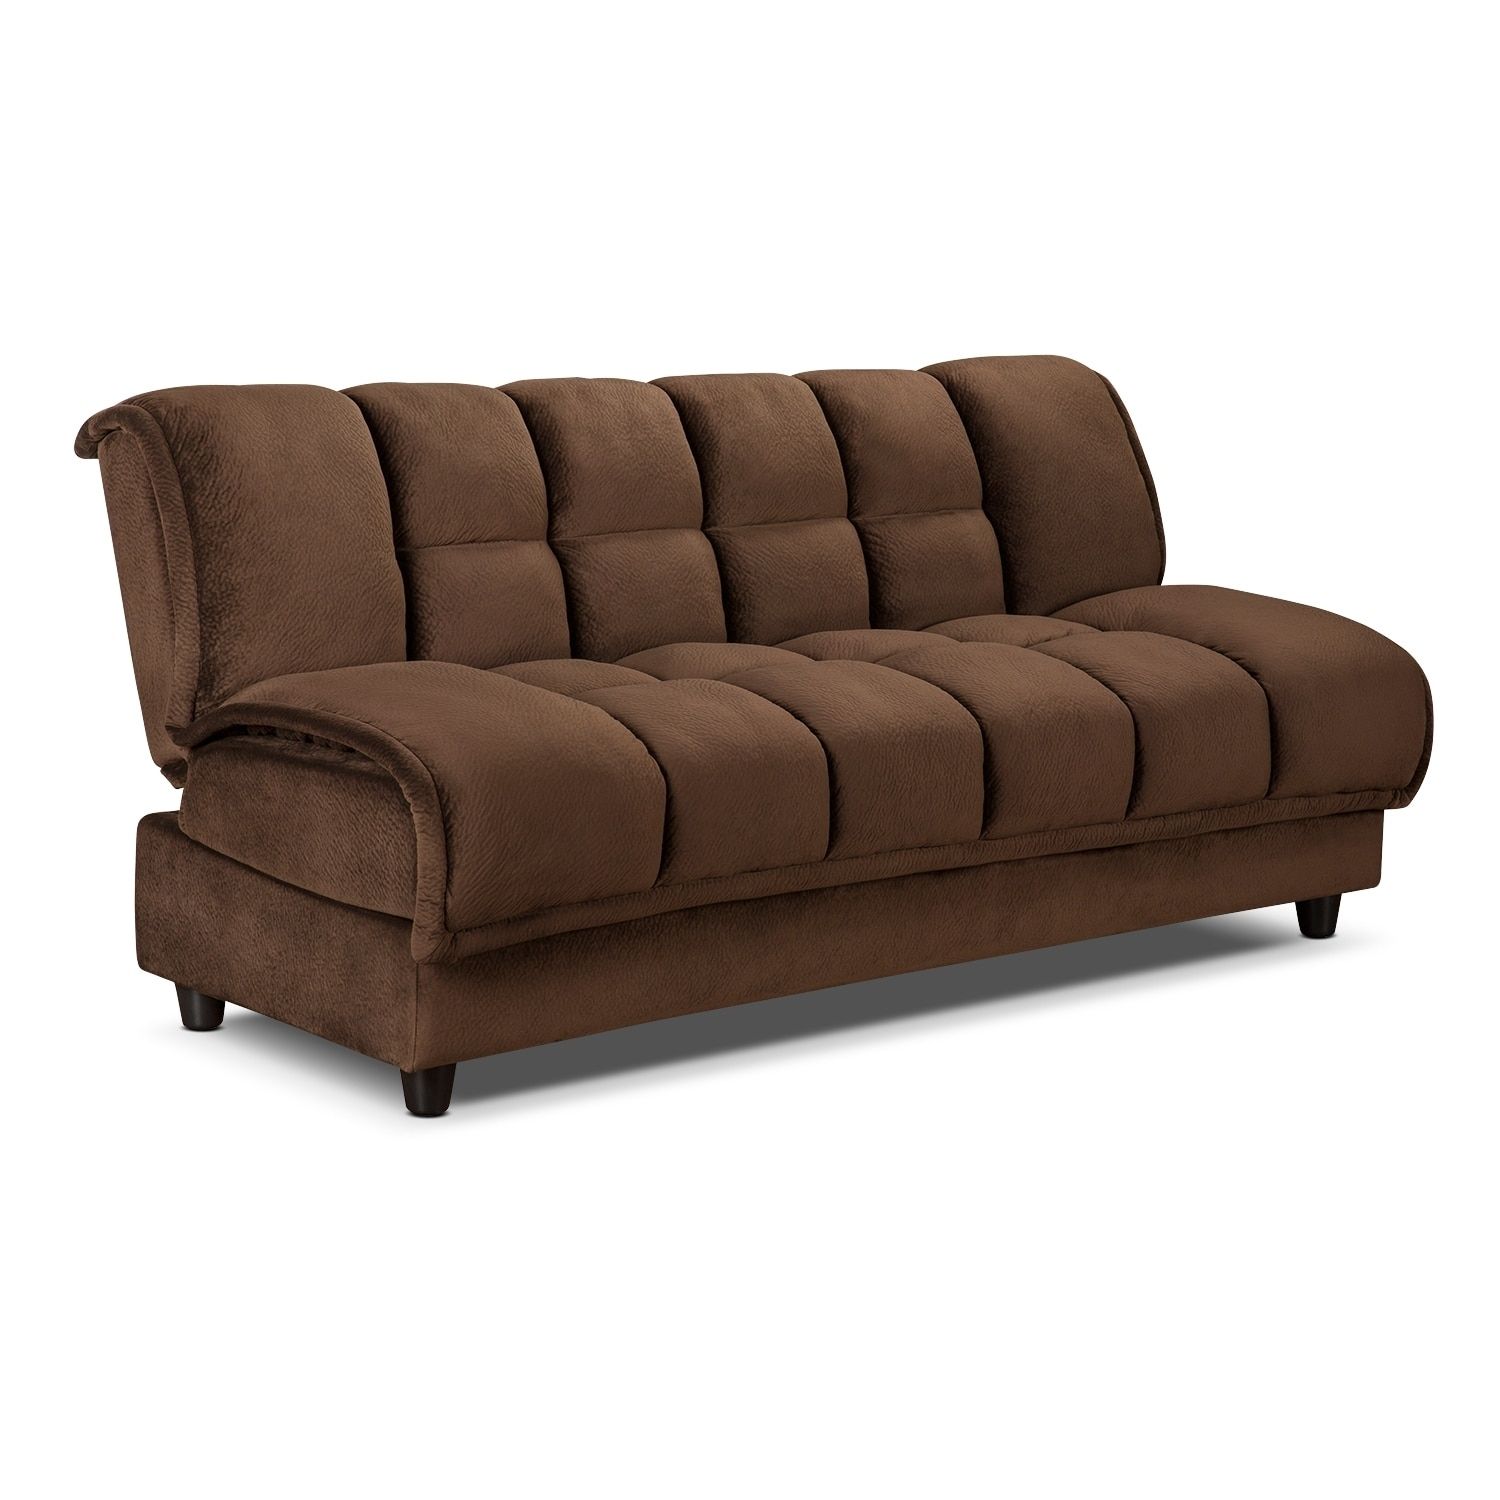 Furniture: Cheap Sectional Sofas Under 300 | Costco Couches Regarding Tallahassee Sectional Sofas (Photo 5 of 10)